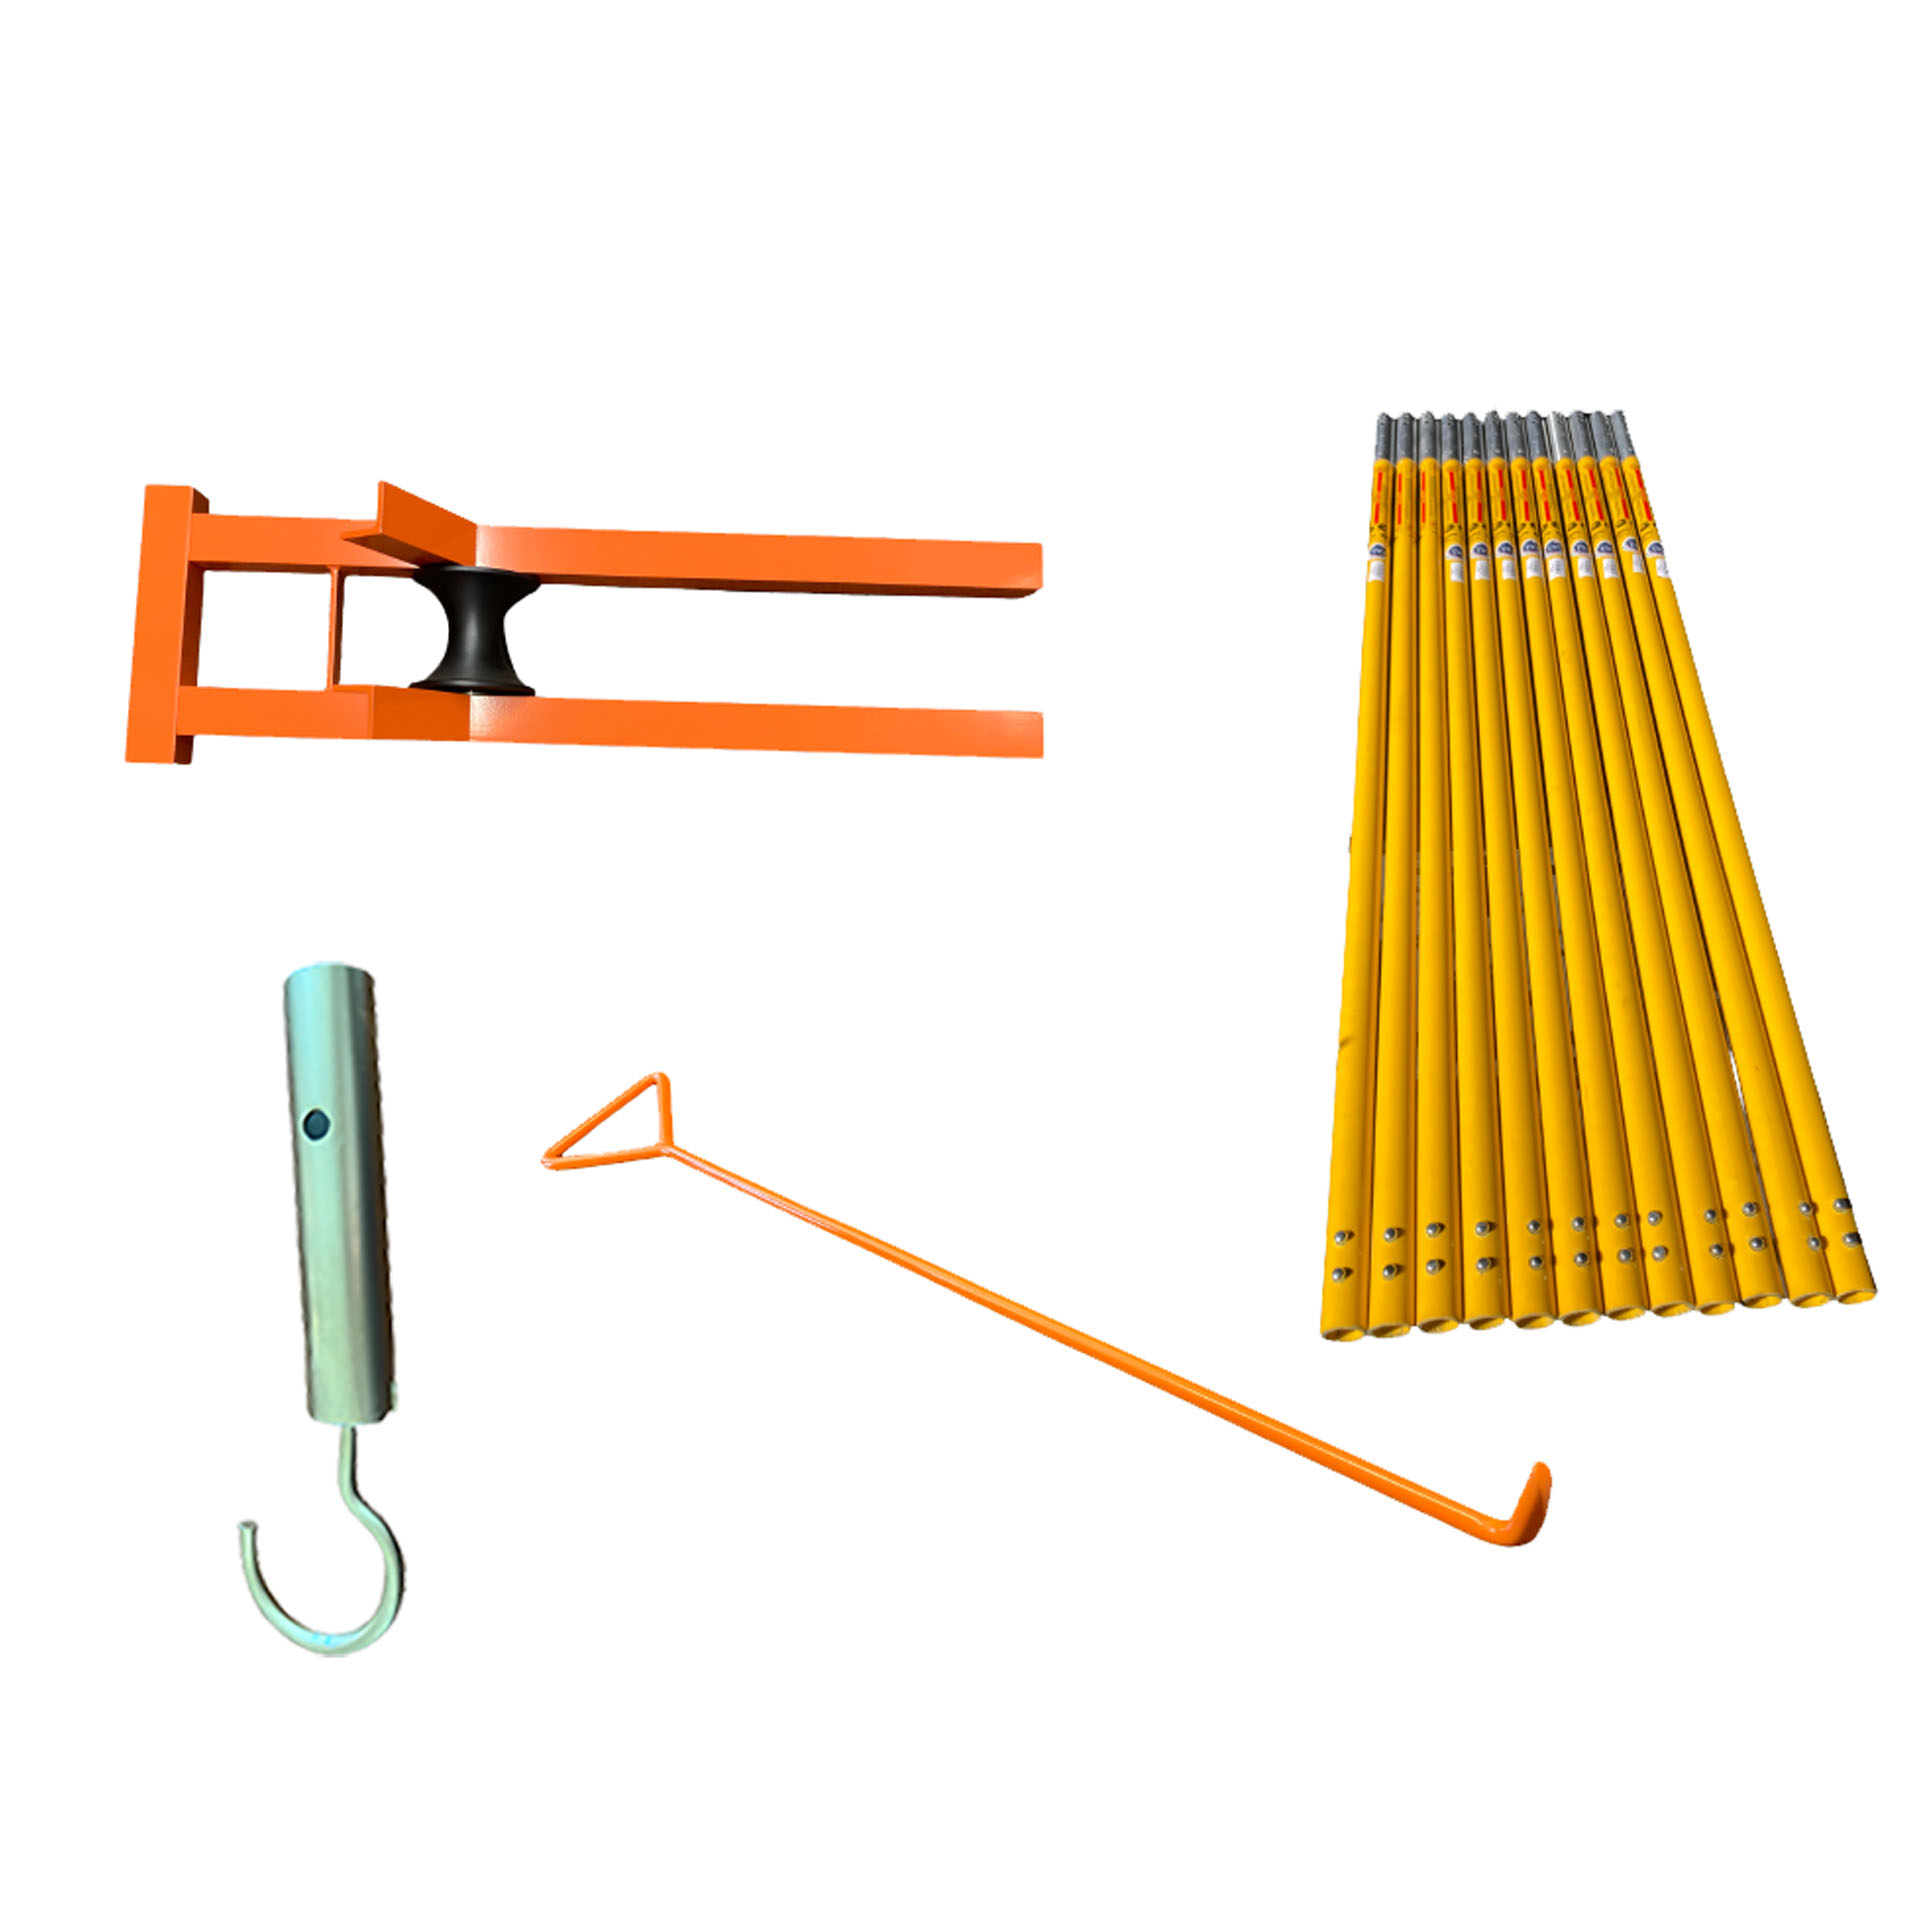 Multiple manhole tools by TruGrit Traction